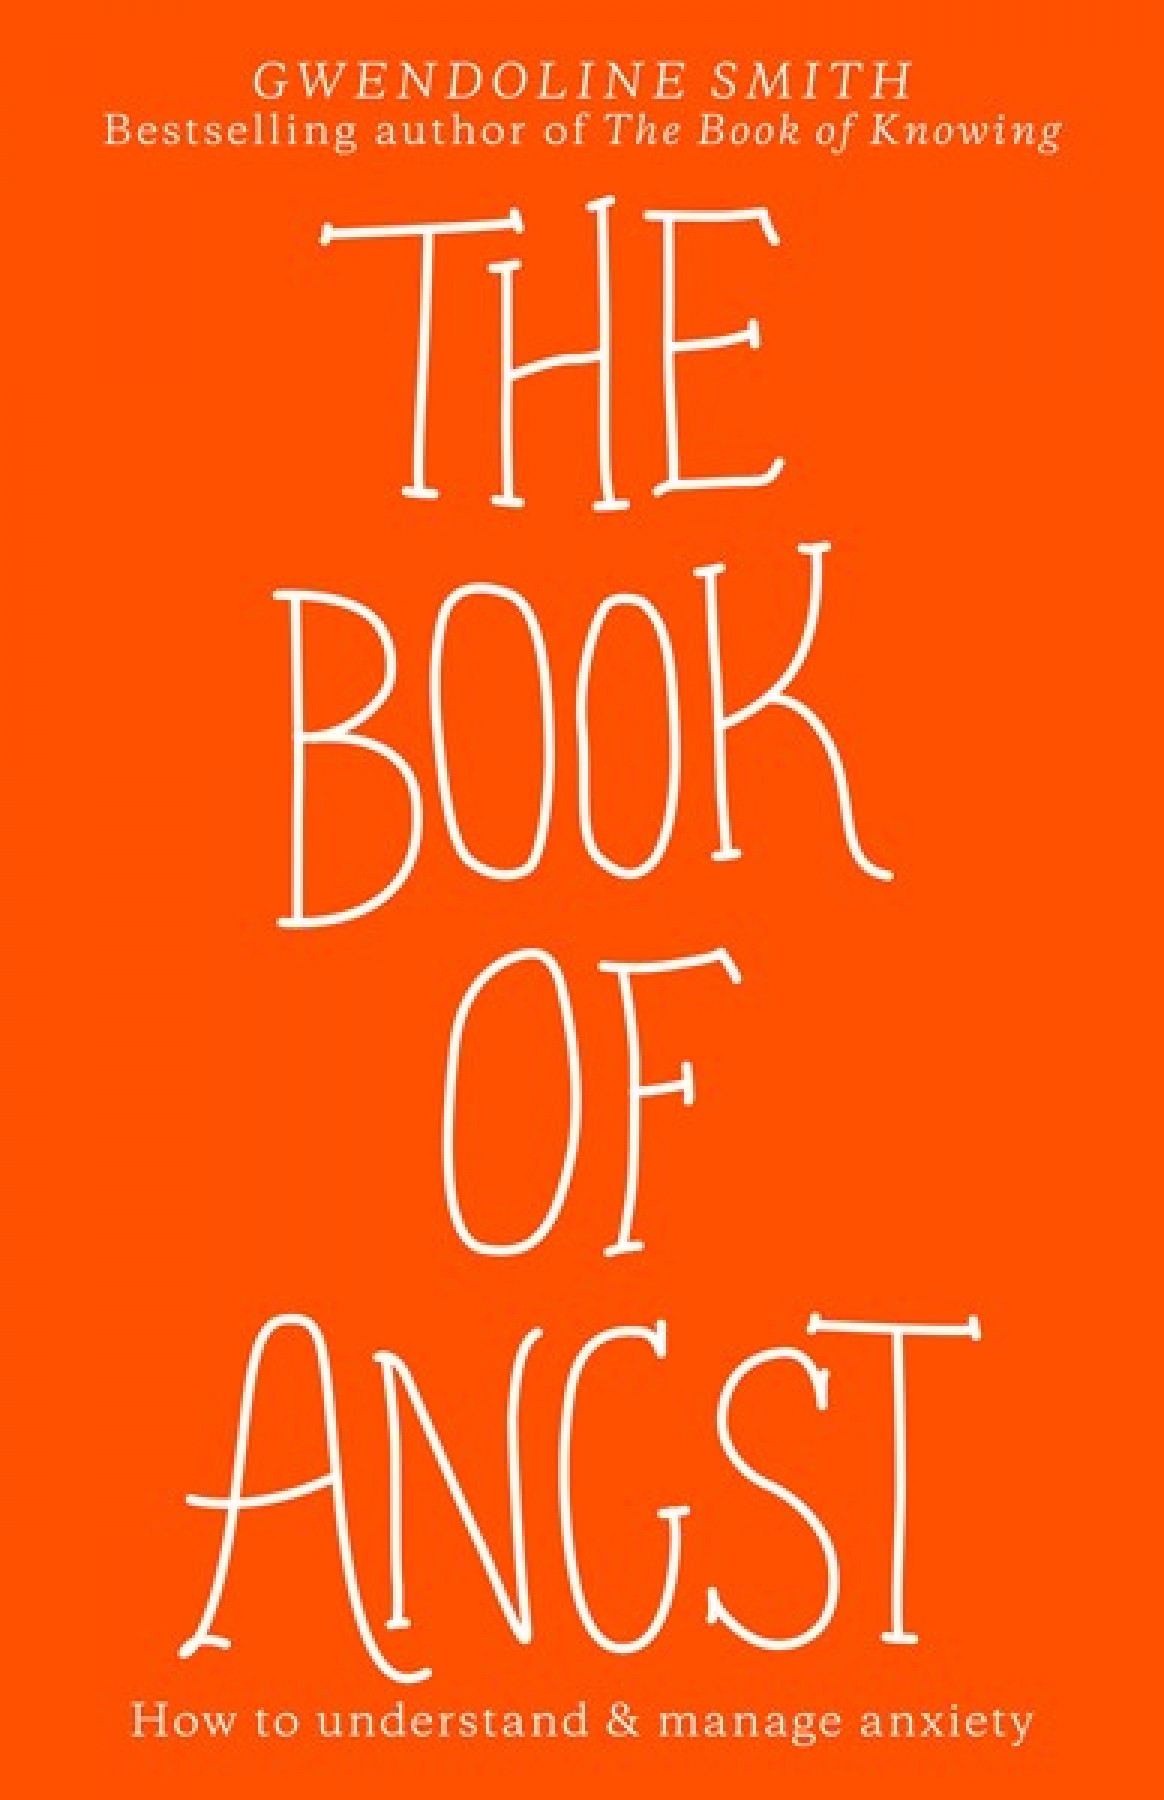 The book of angst:  Understand and manage anxiety